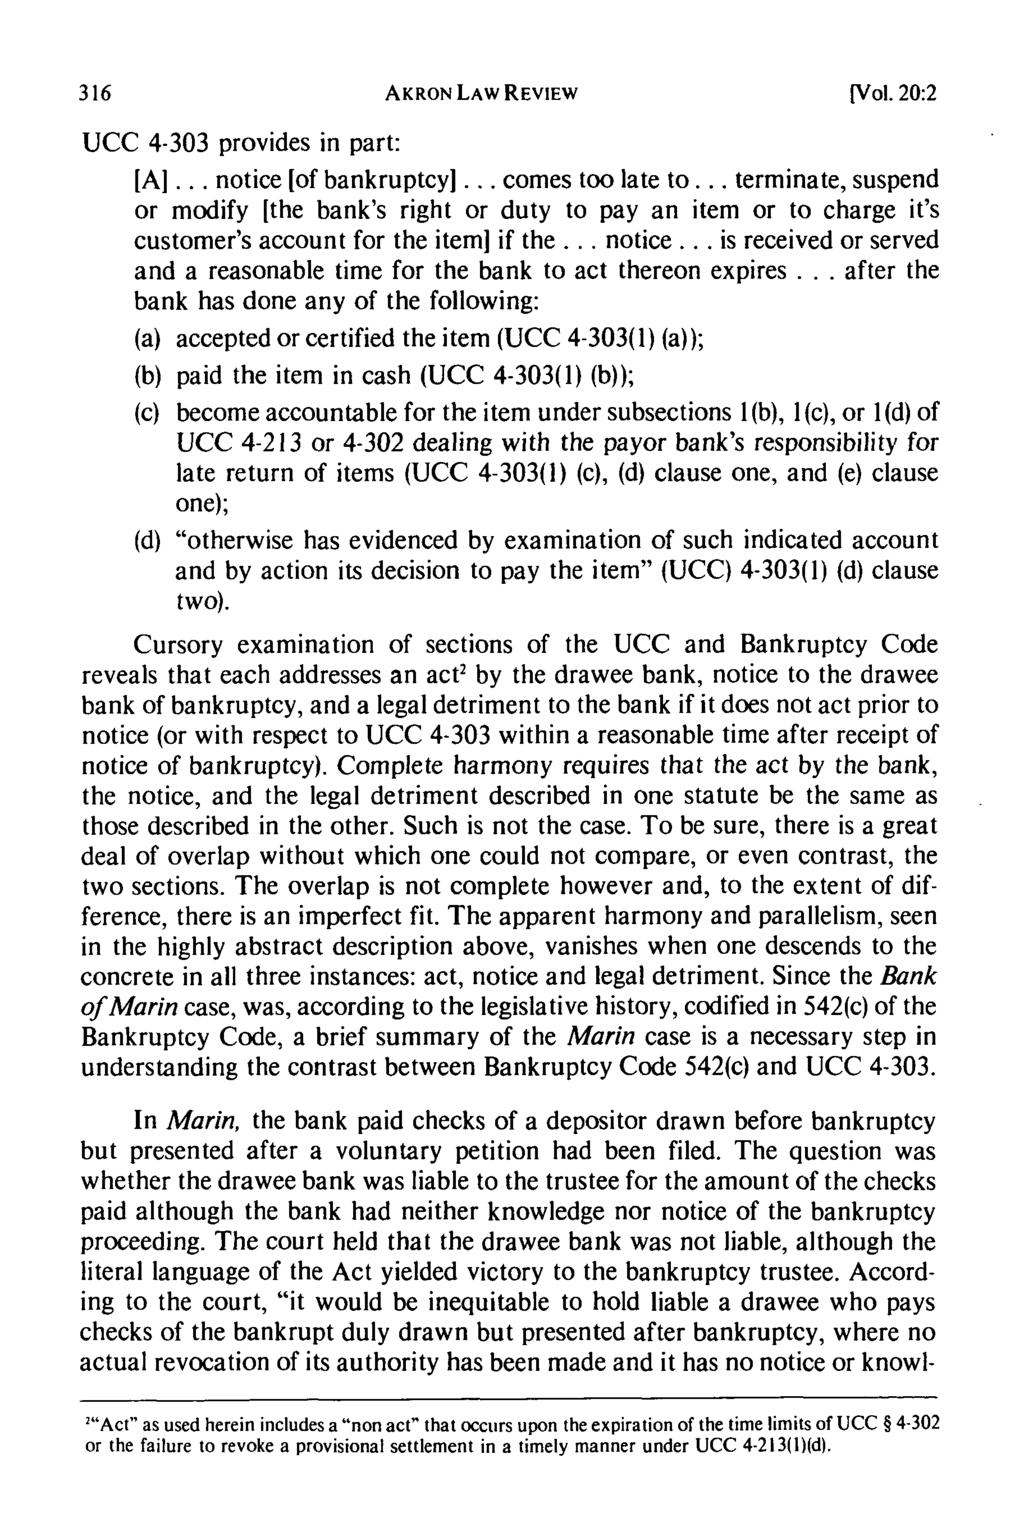 Akron Law Review, Vol. 20 [1987], Iss. 2, Art. 5 AKRON LAW REVIEW [Vol. 20:2 UCC 4-303 provides in part: [A]... notice [of bankruptcy]... comes too late to.